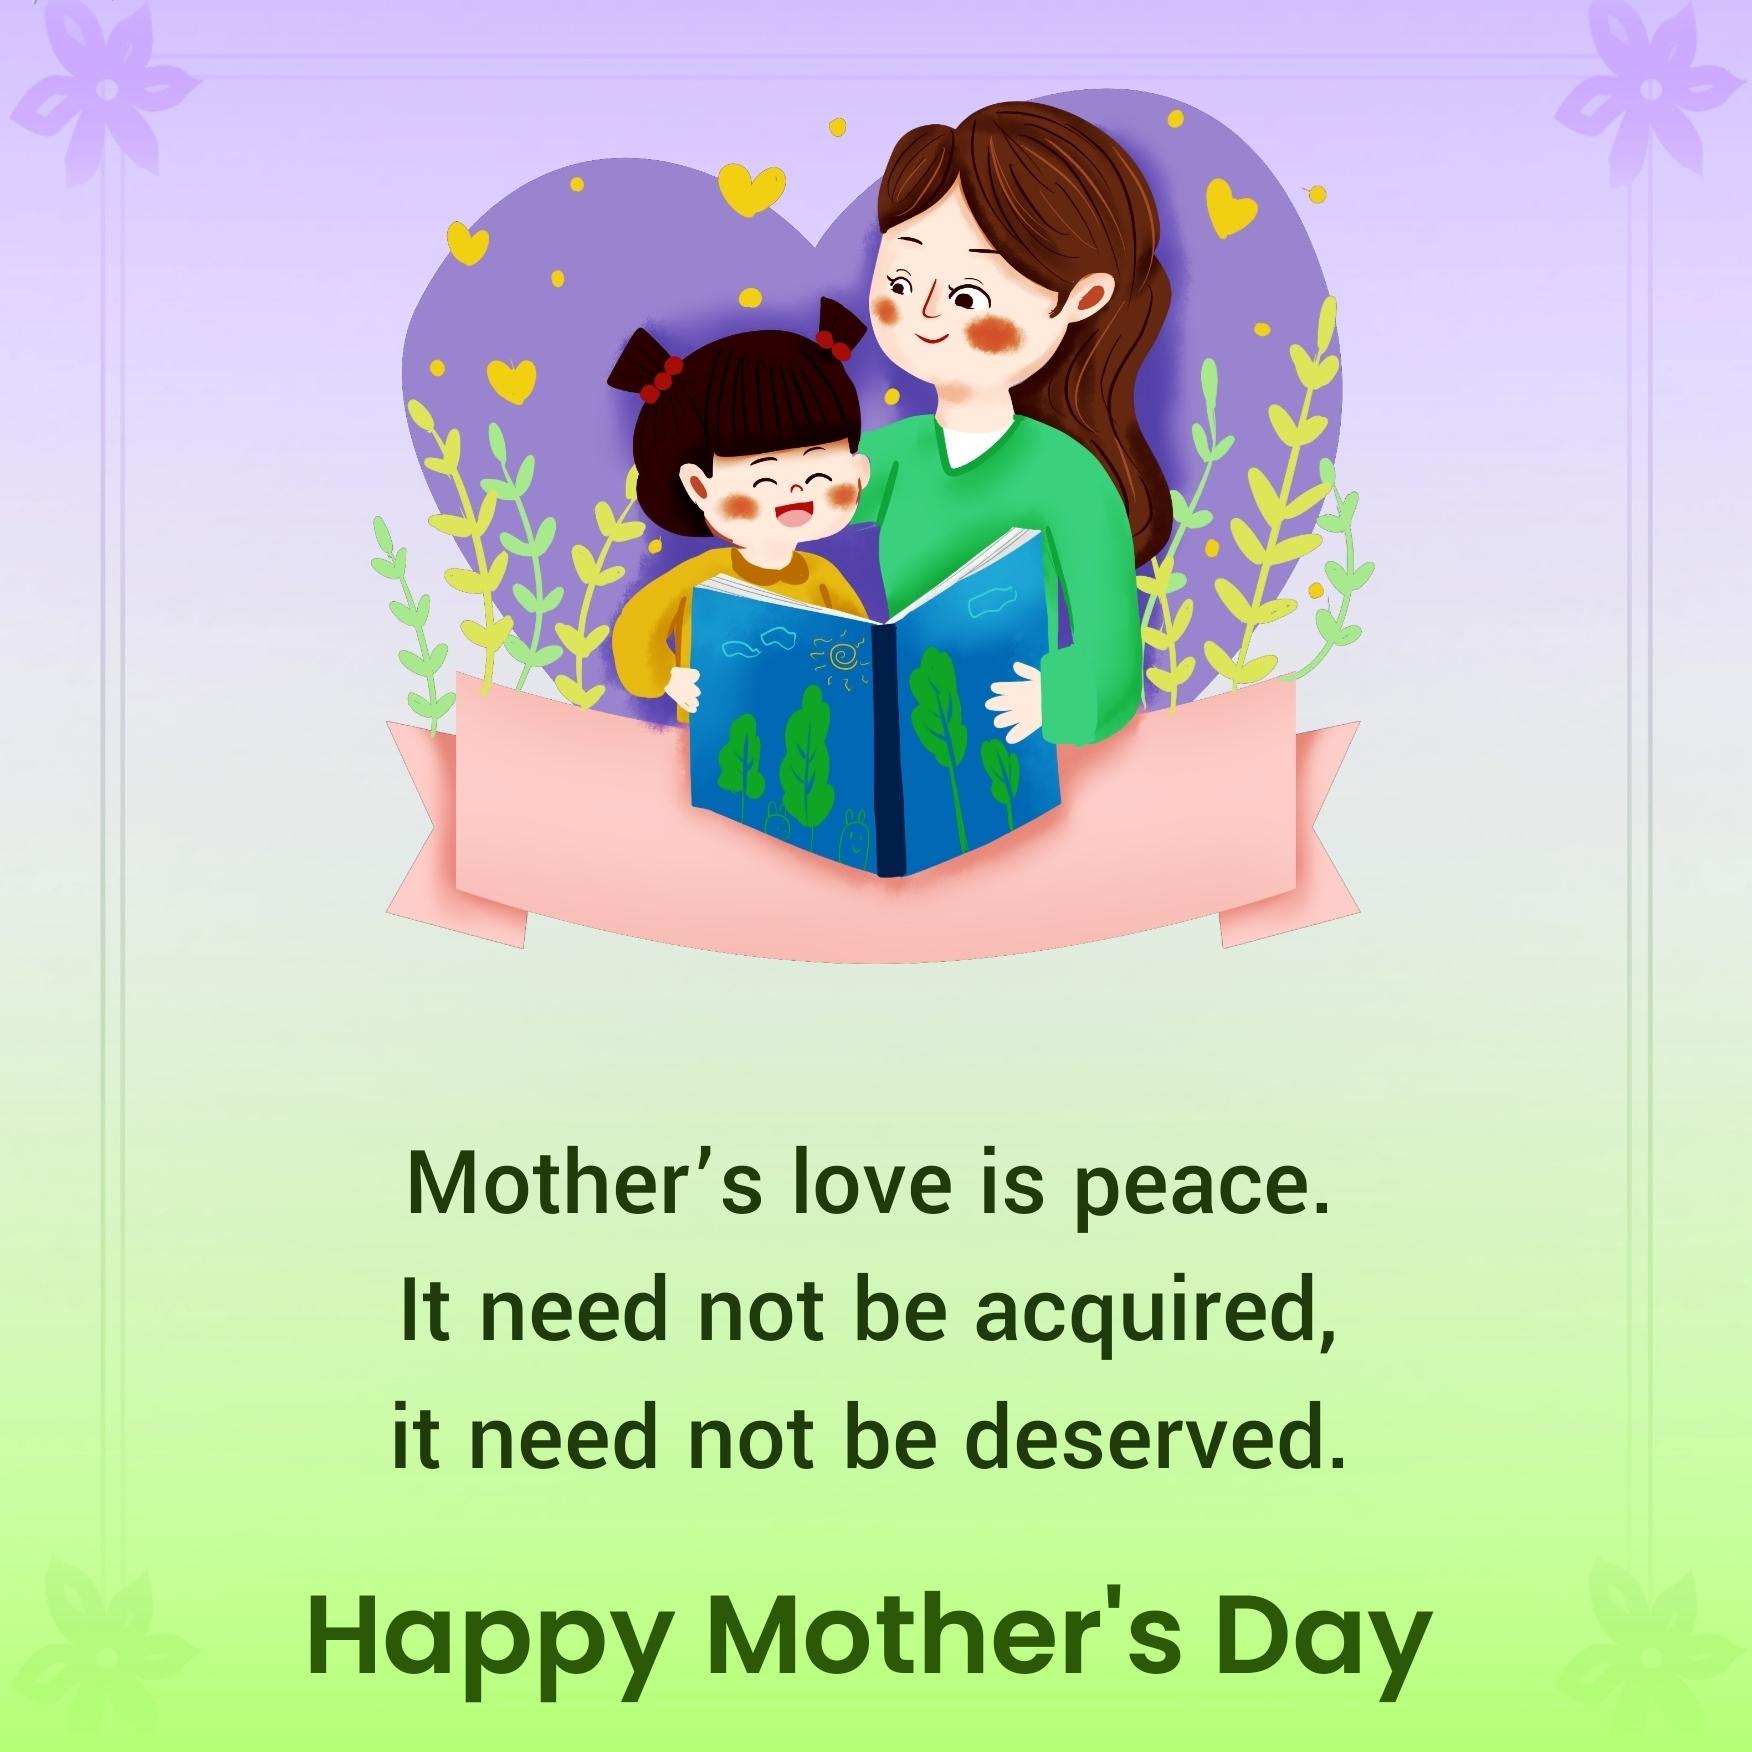 Mothers love is peace It need not be acquired